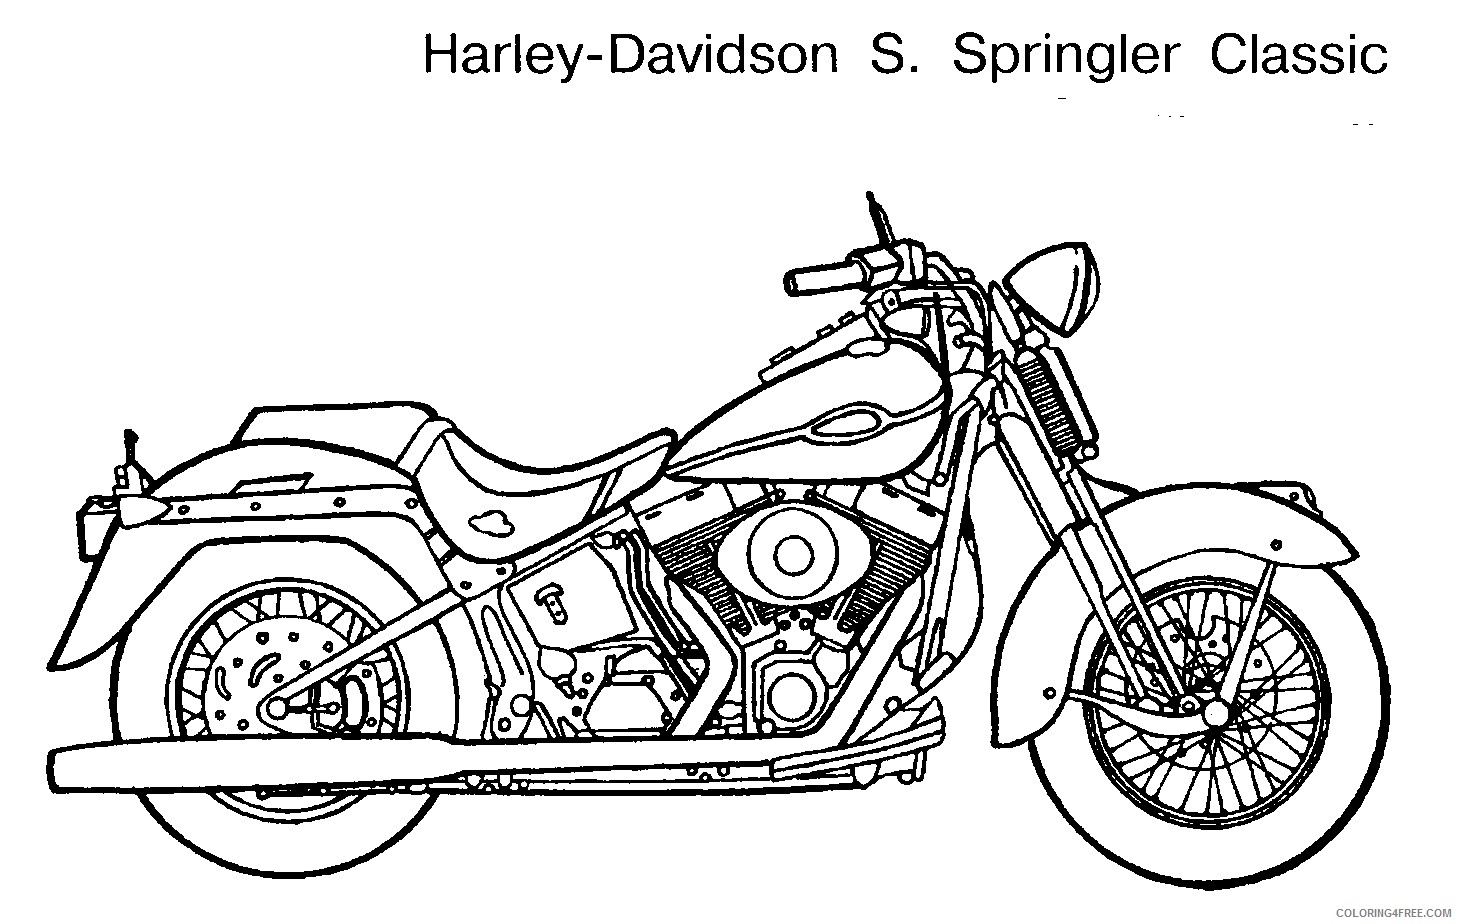 motorcycle coloring pages harley davidson classic Coloring4free